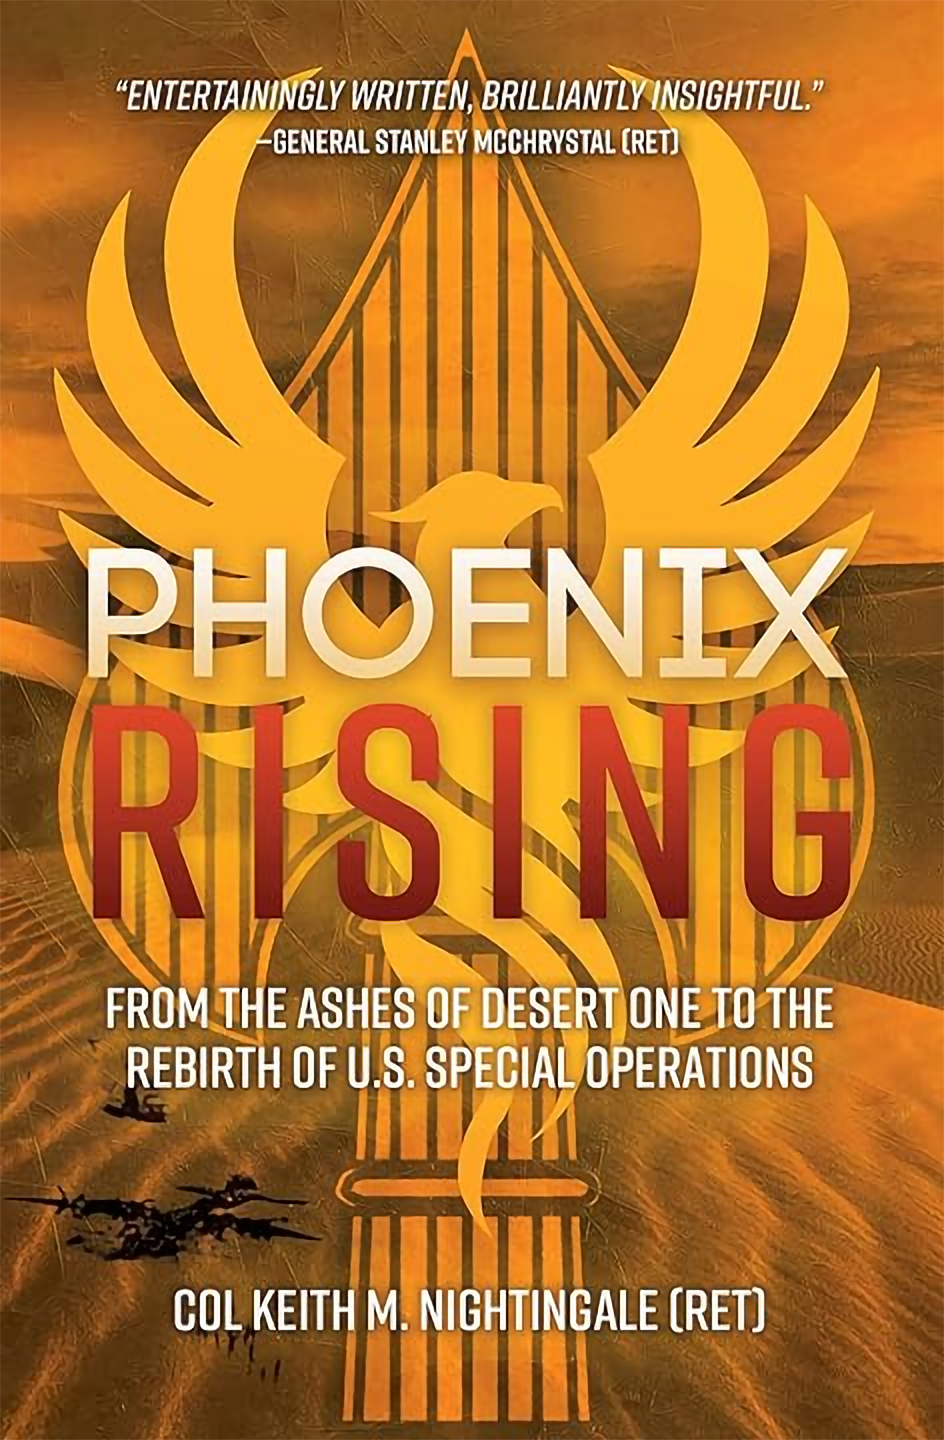 The cover of one of Nightingale's books, Phoenix Rising.